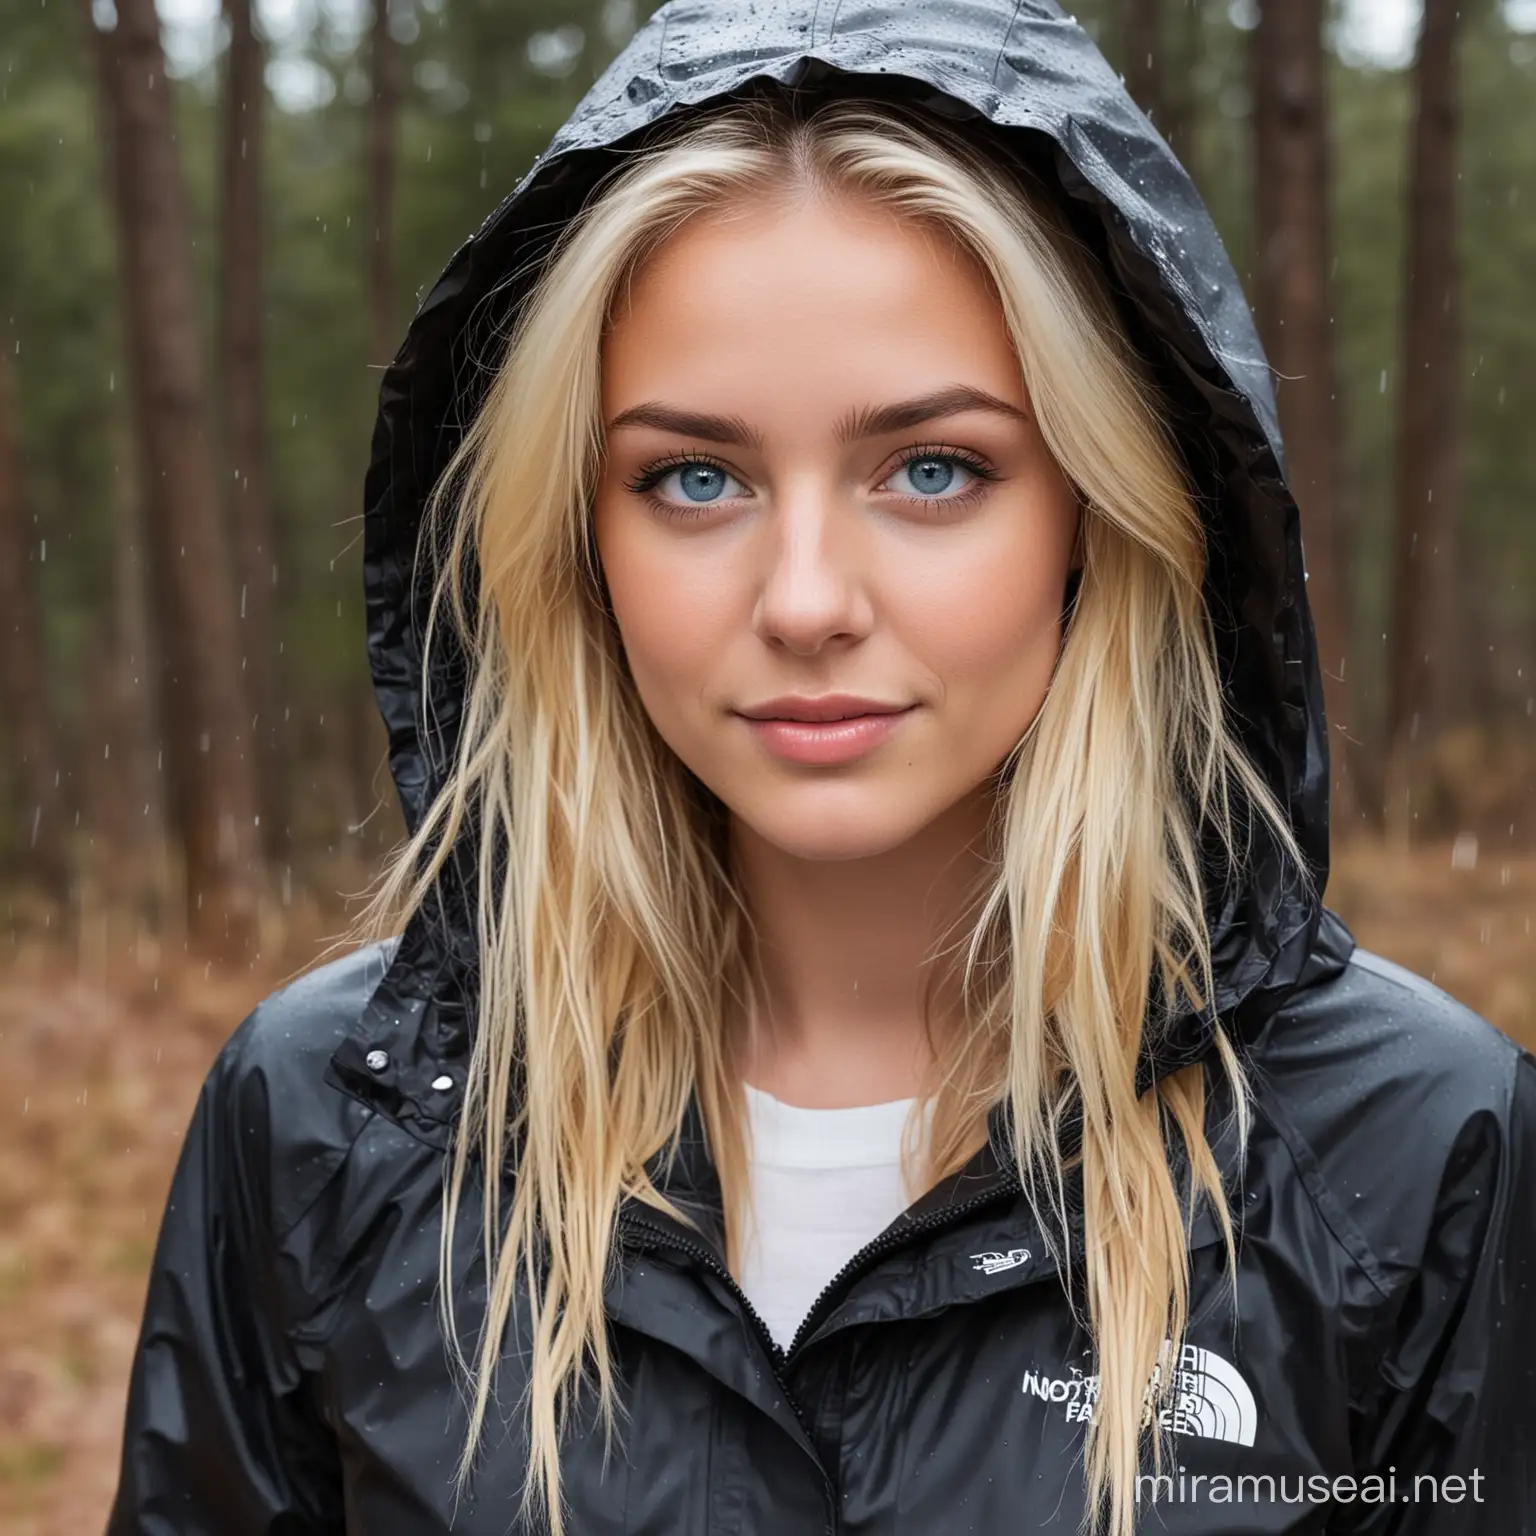 A sexy 21-year-old woman with blonde hair and blue eyes, wearing a black The North Face rain jacket